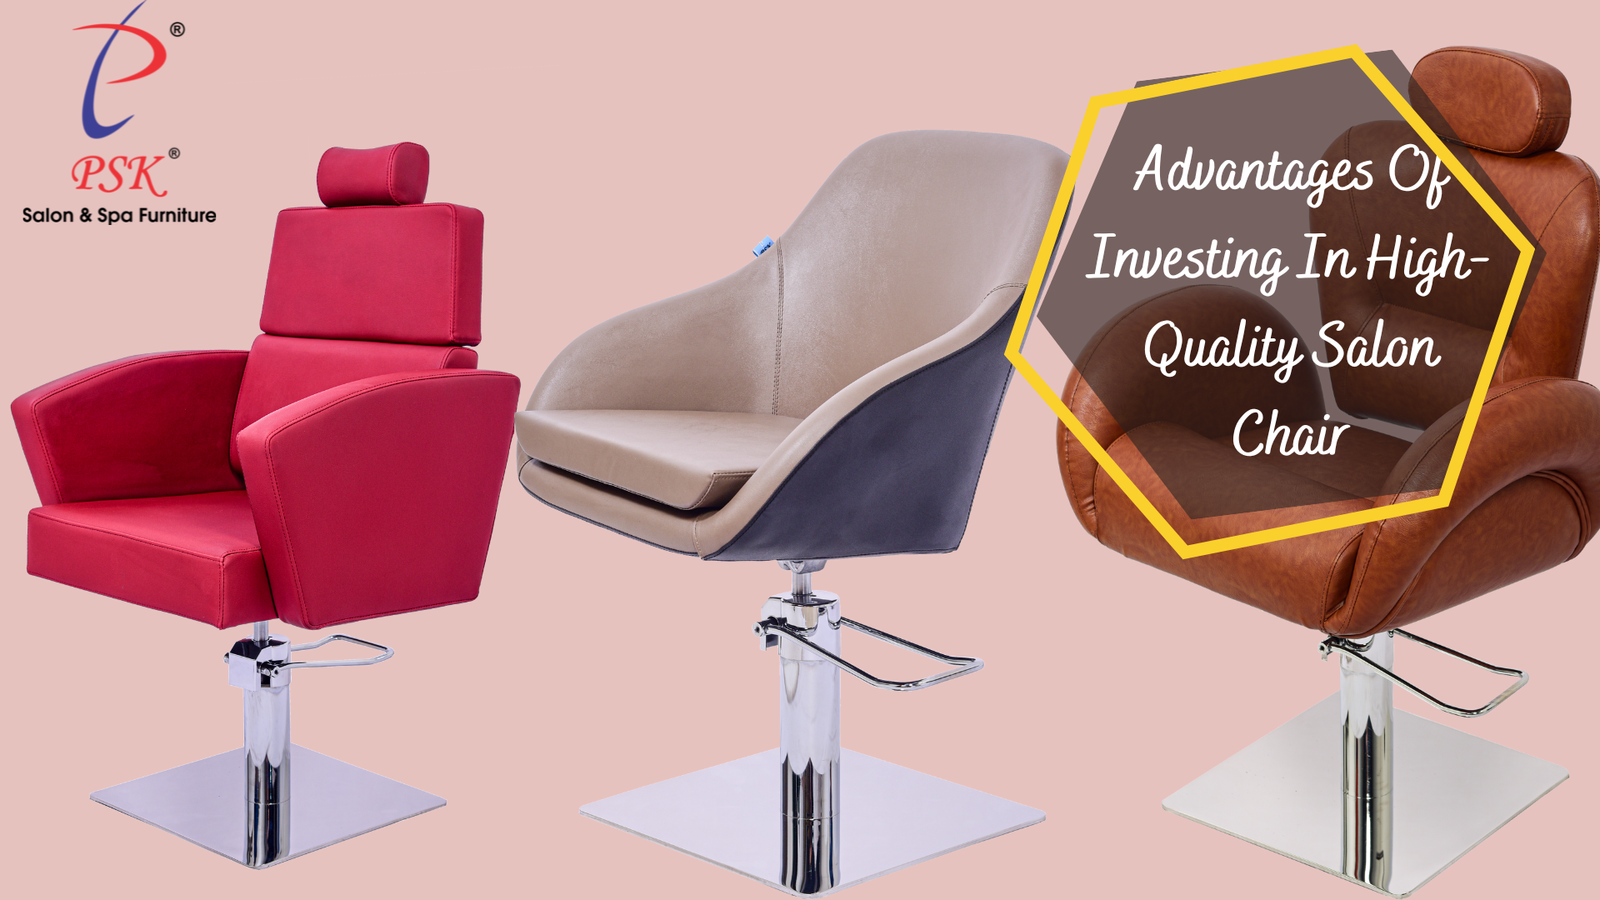 You are currently viewing Advantages Of Investing In High-Quality Salon Chair